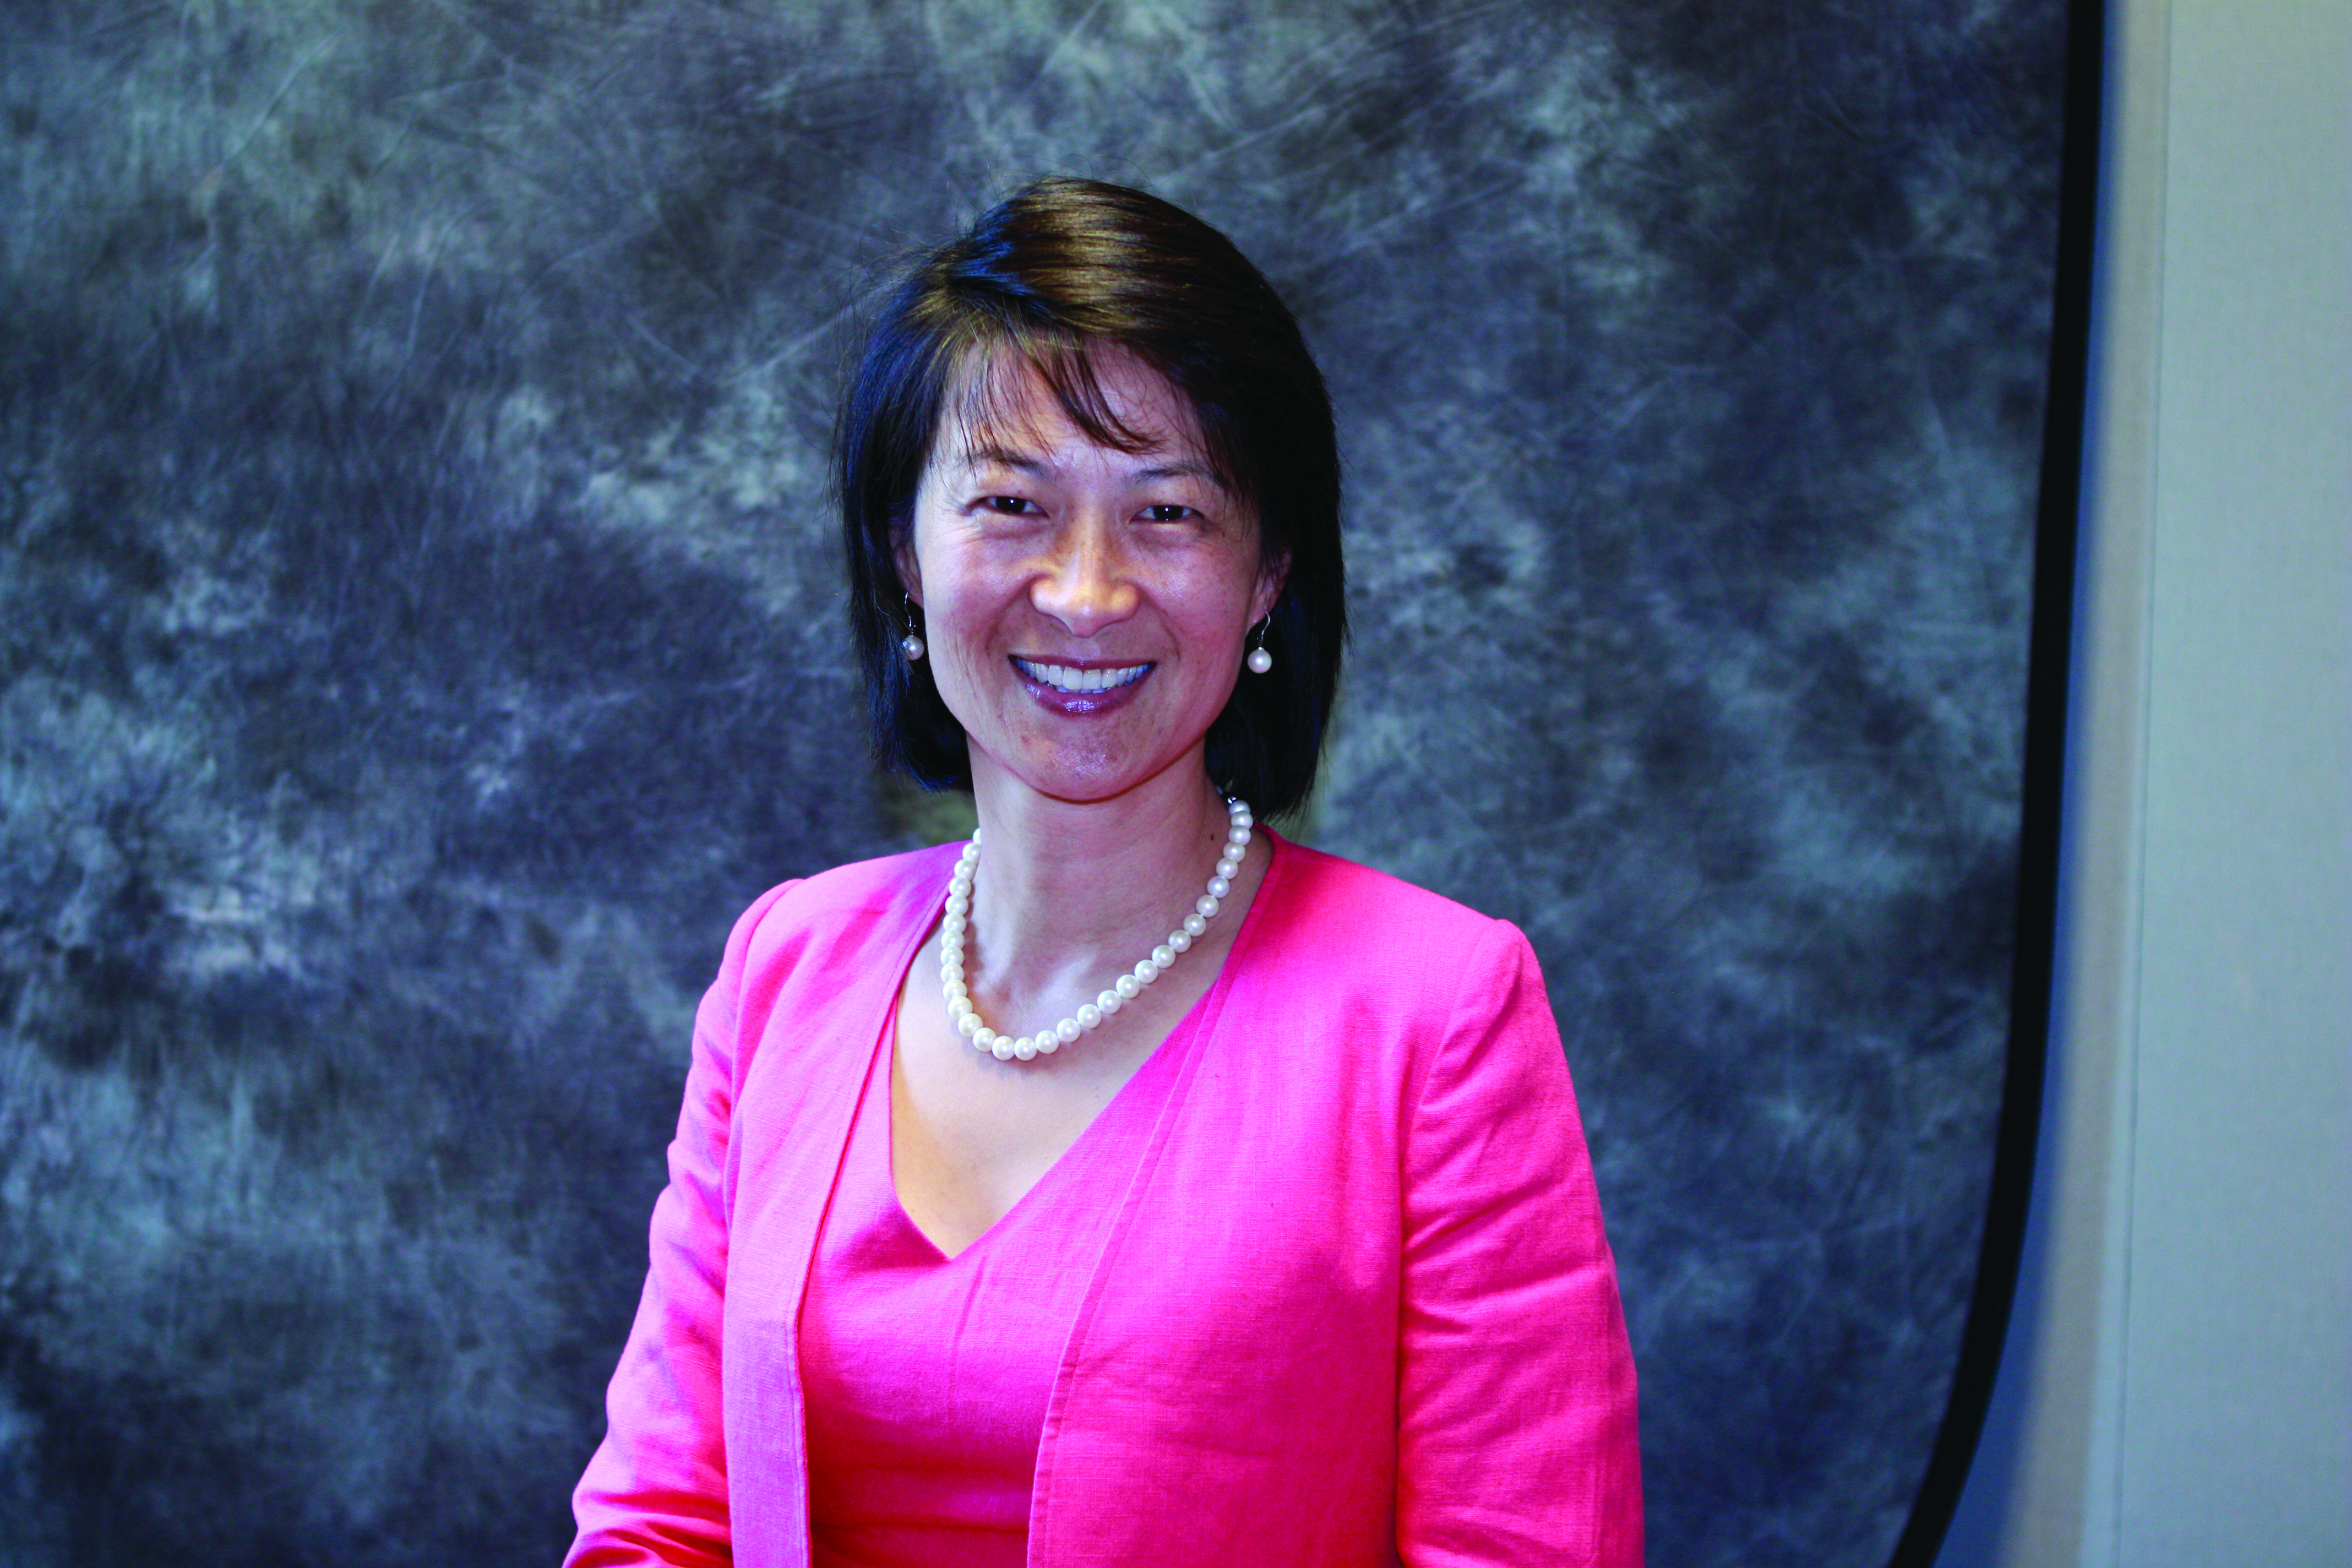 Sulin Ba, professor of information systems and associate dean of academic and research support